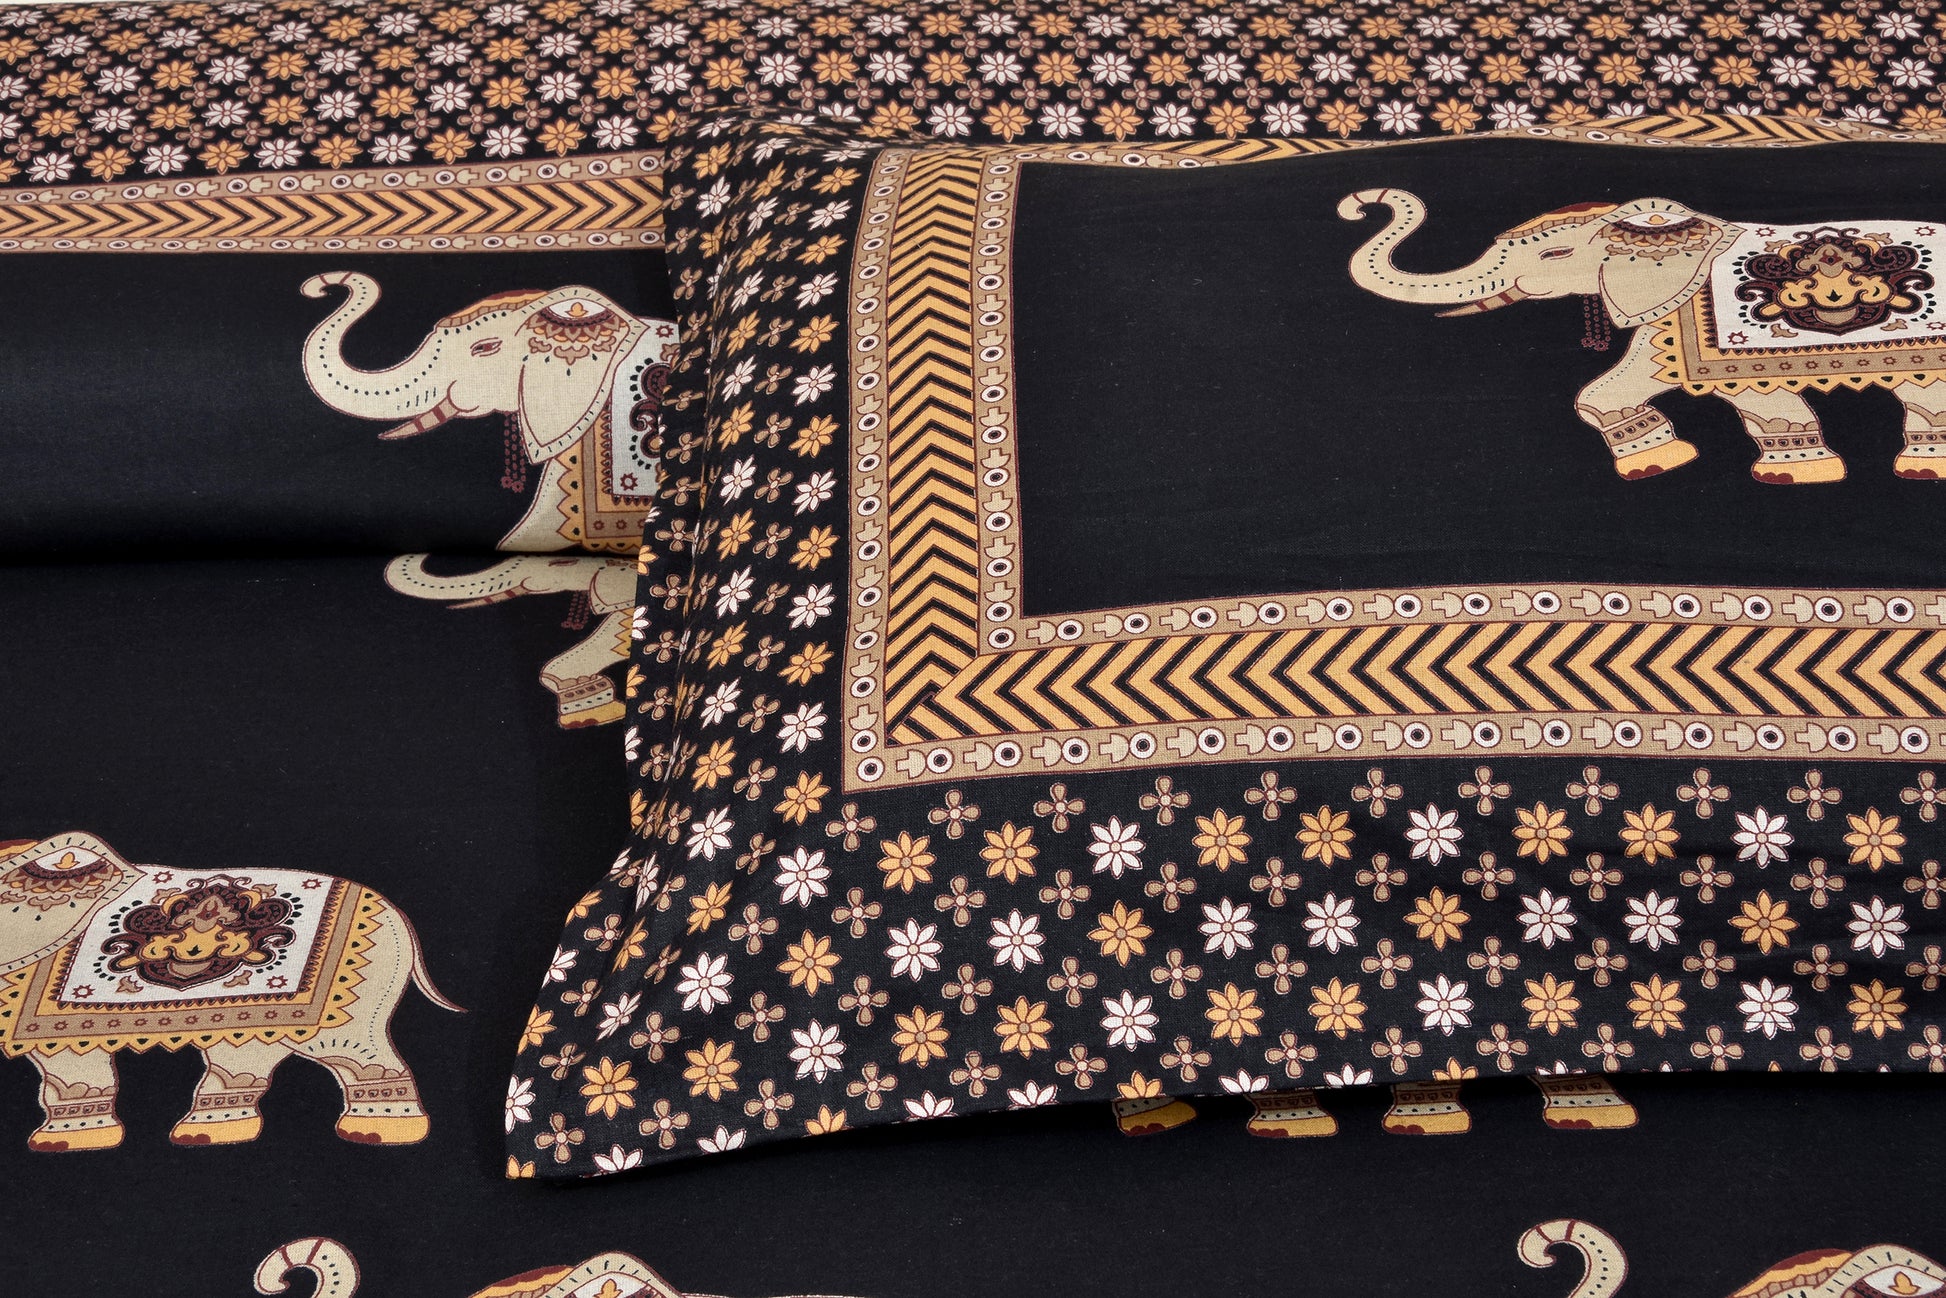 100% Cotton King Size Bed sheets With 2 Pillow Cover Jungle Cruize www.jaipurtohome.com